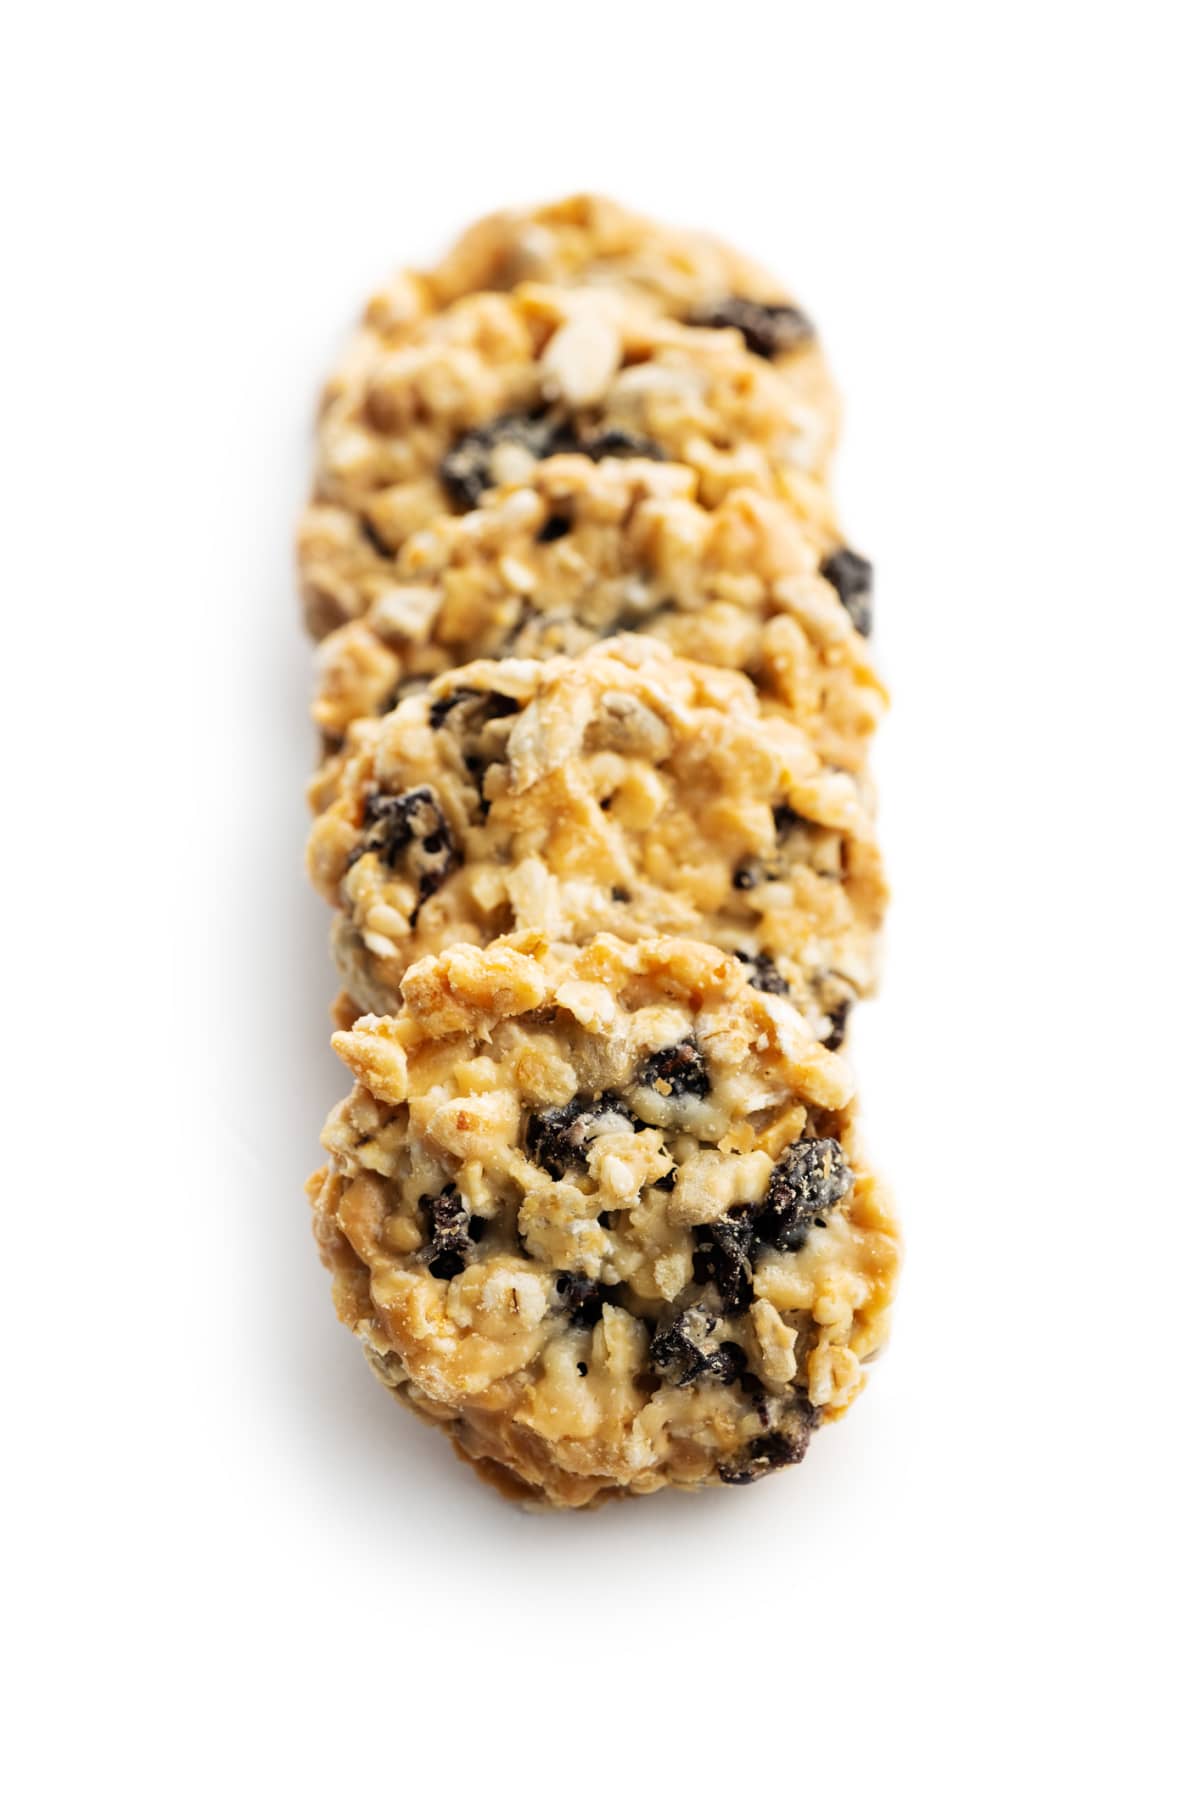 Wholegrain oat cookies. Cookies with oatmeal and raisins isolated on the white table.